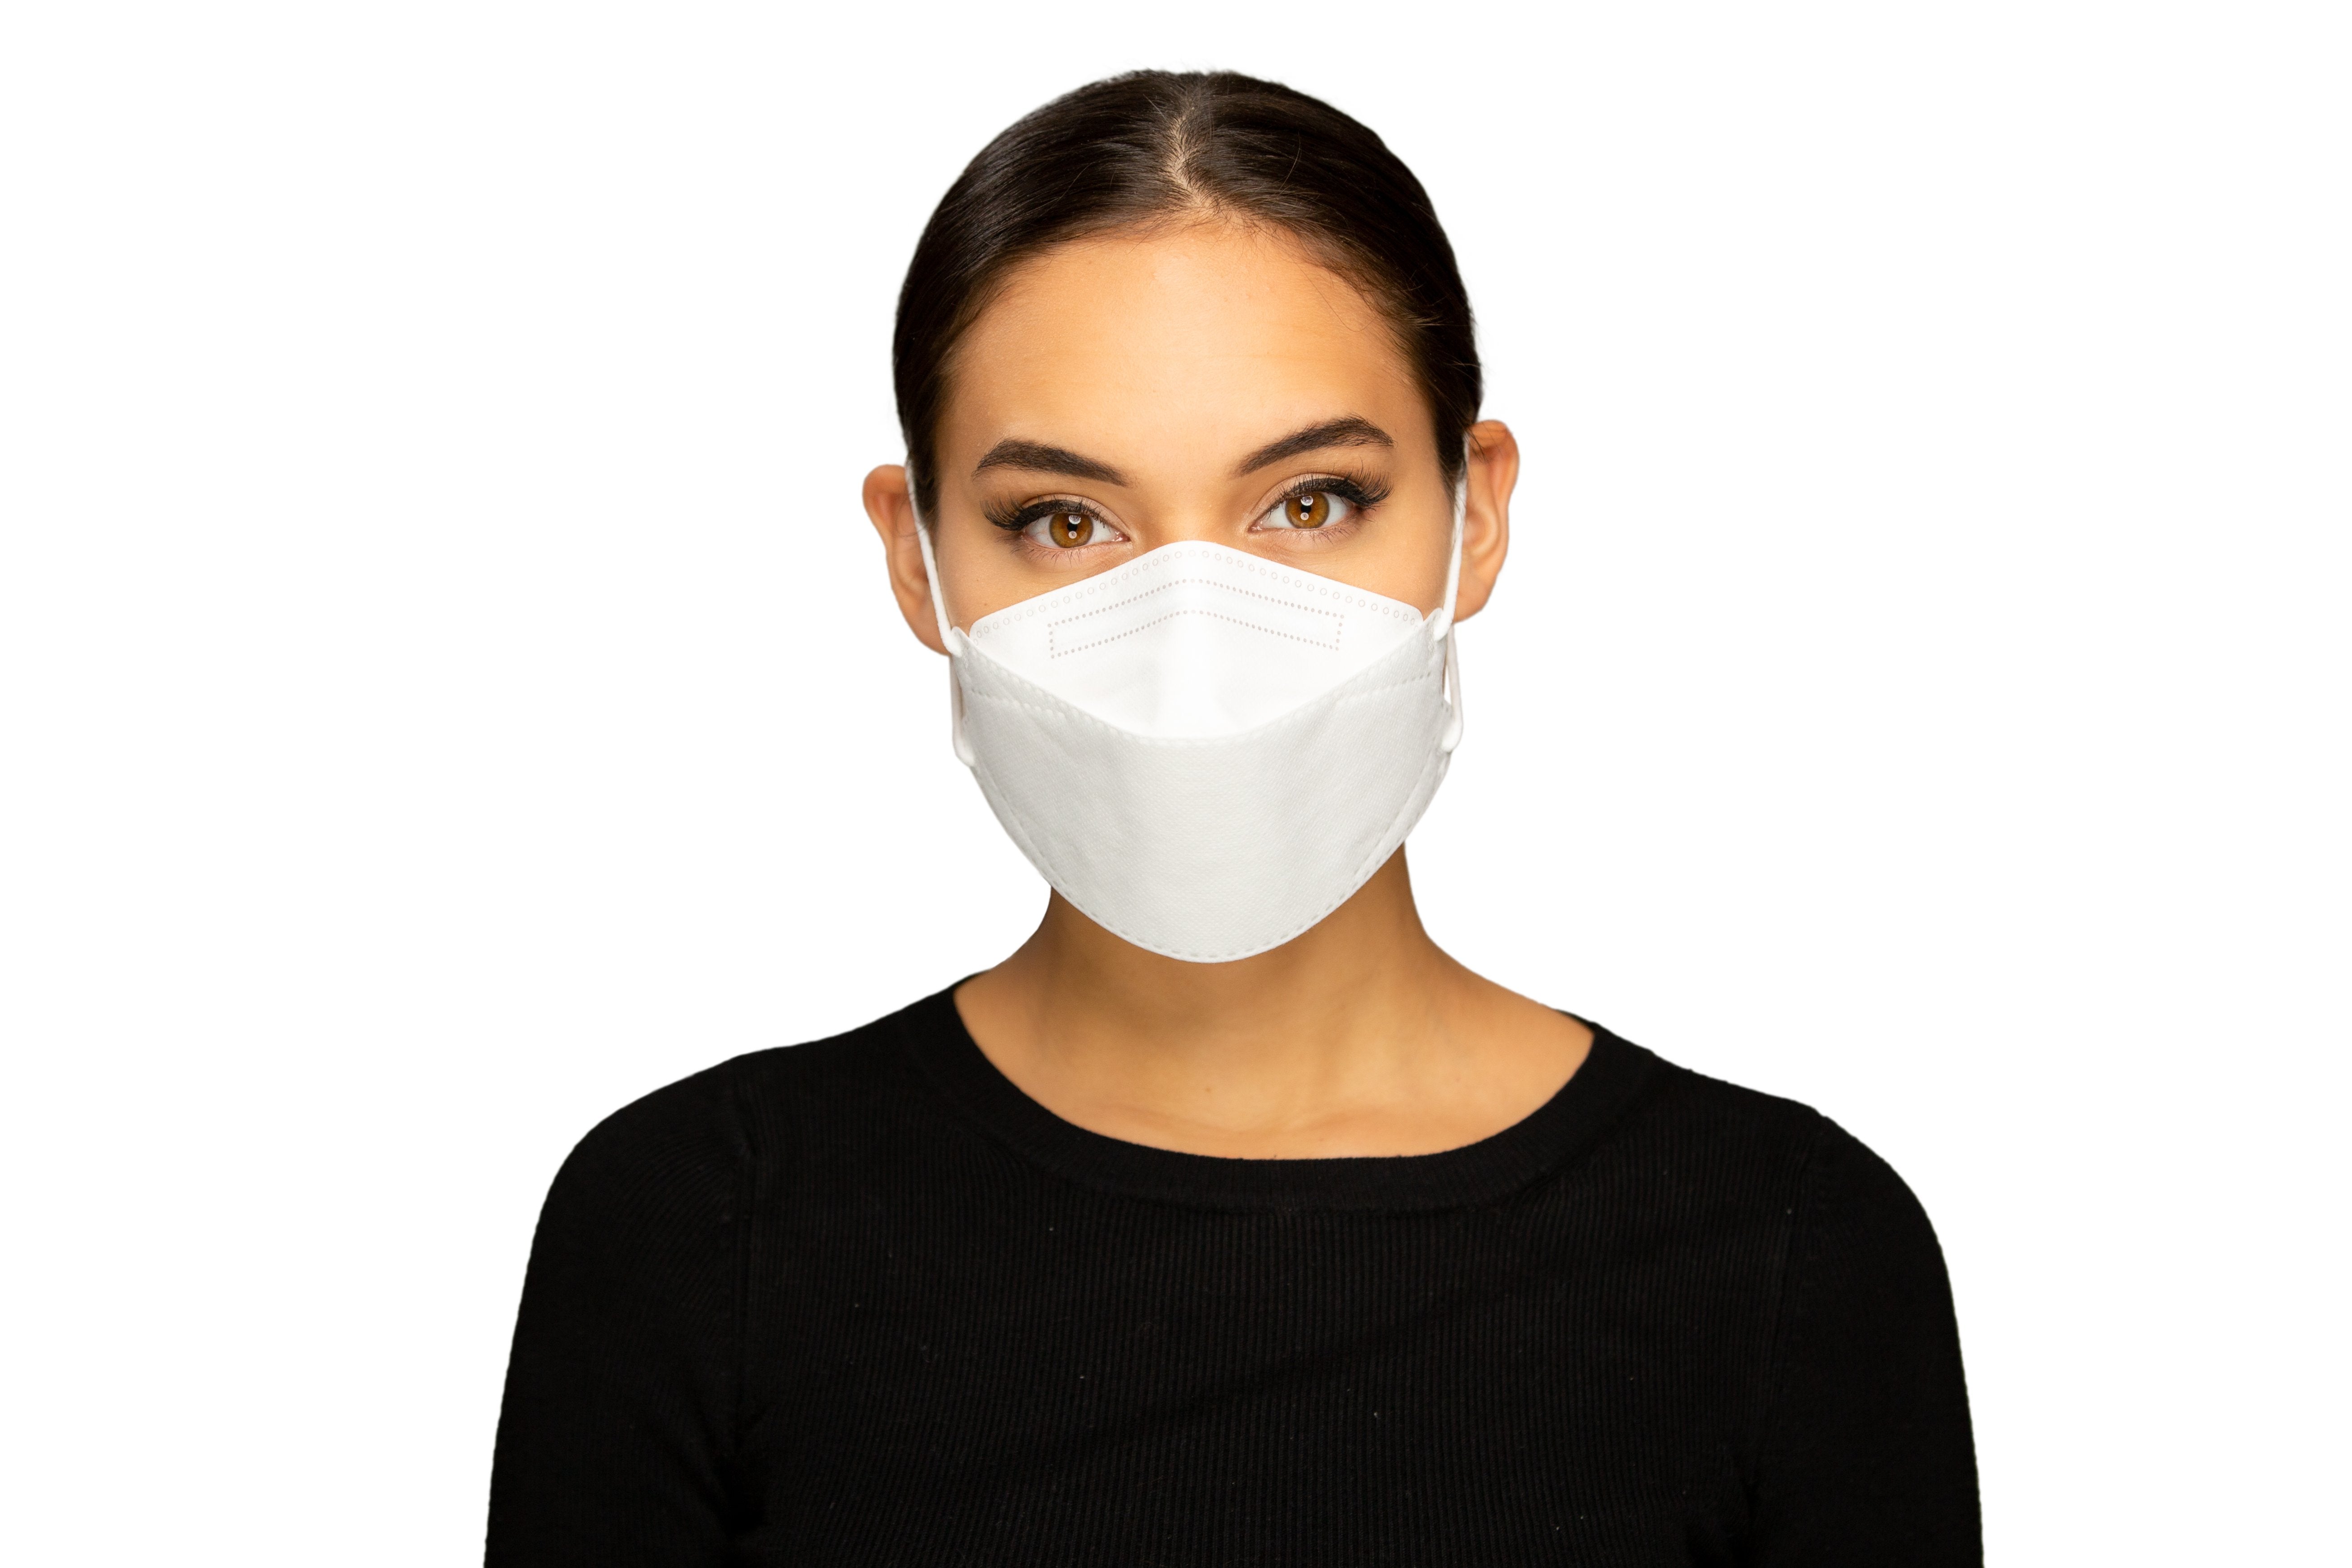 Good Manner KF94 Mask Canada (10 Masks), White Adult / Free Shipping within Canada /The Authorized Distributor in Canada. - Clear Pro Global